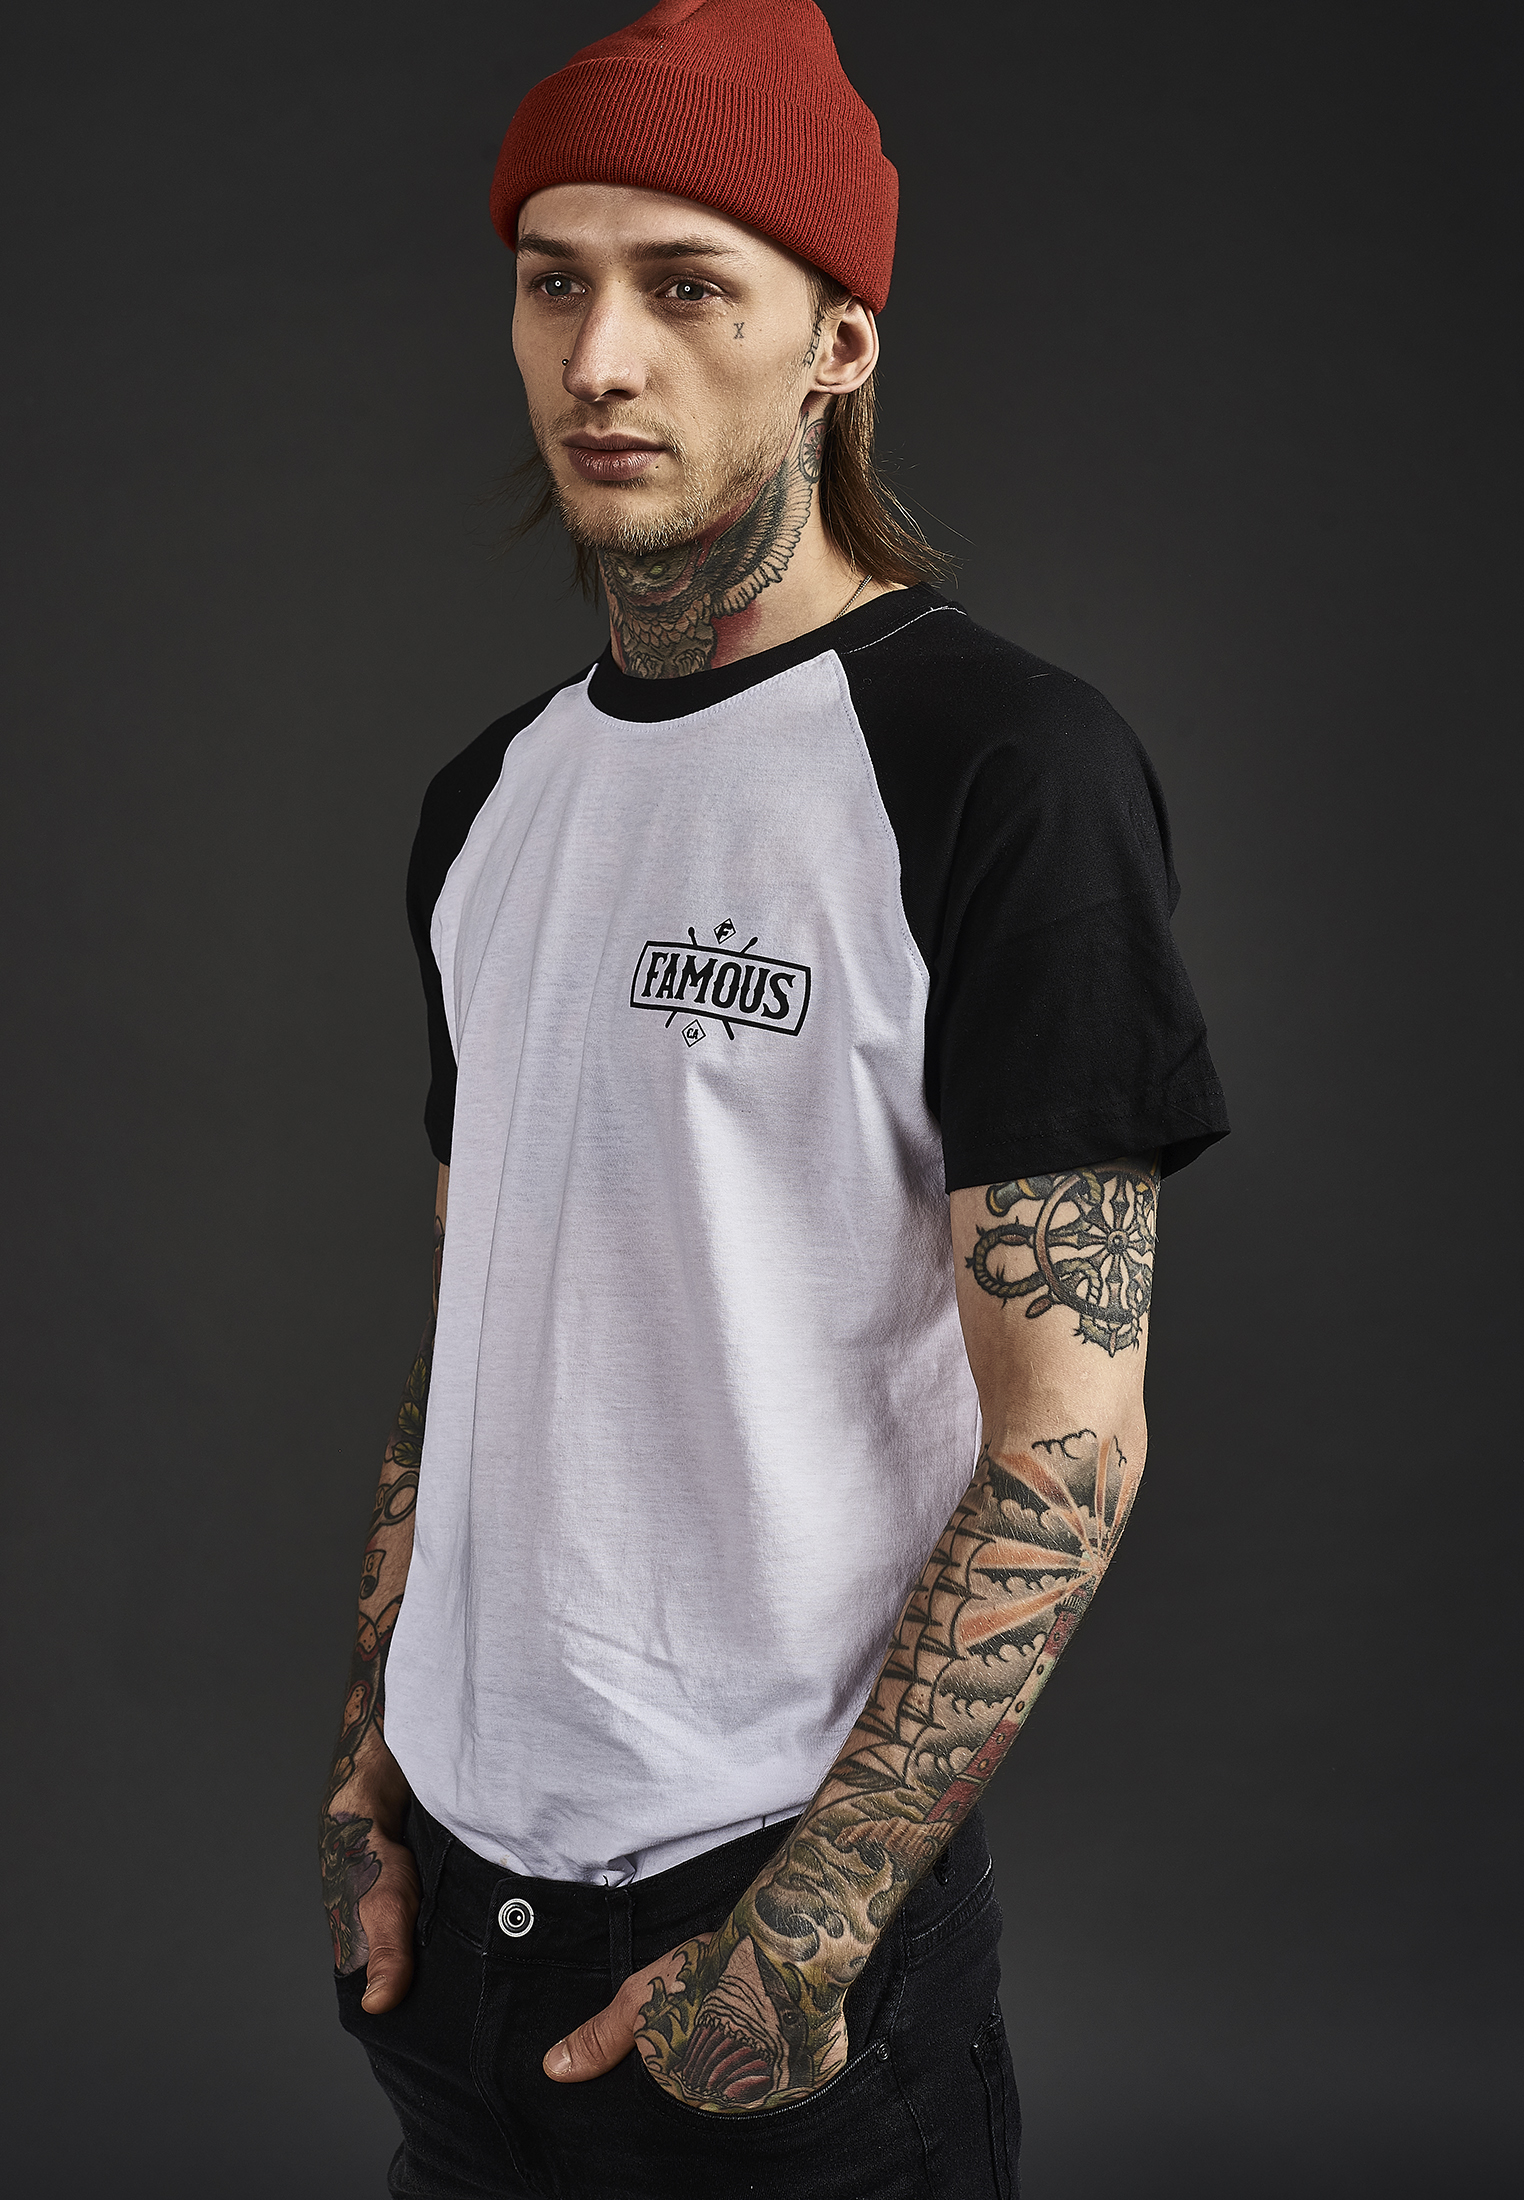 T-Shirts Chaos Patch Raglan Tee in Farbe wht/blk